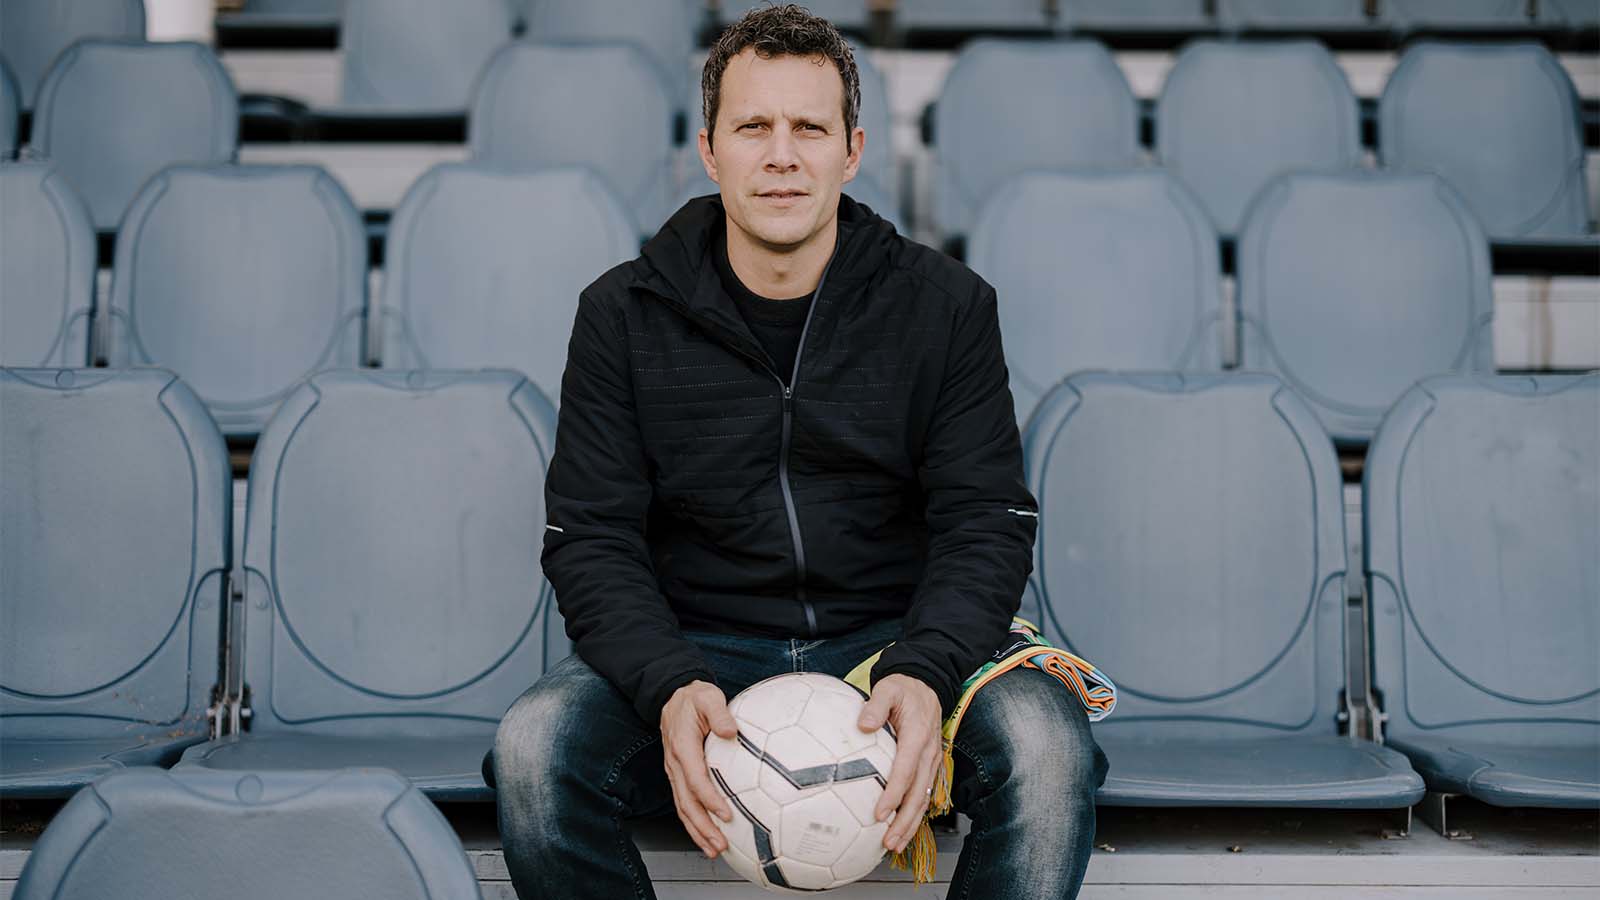 A man is sitting on stadium seating, holding a soccer ball